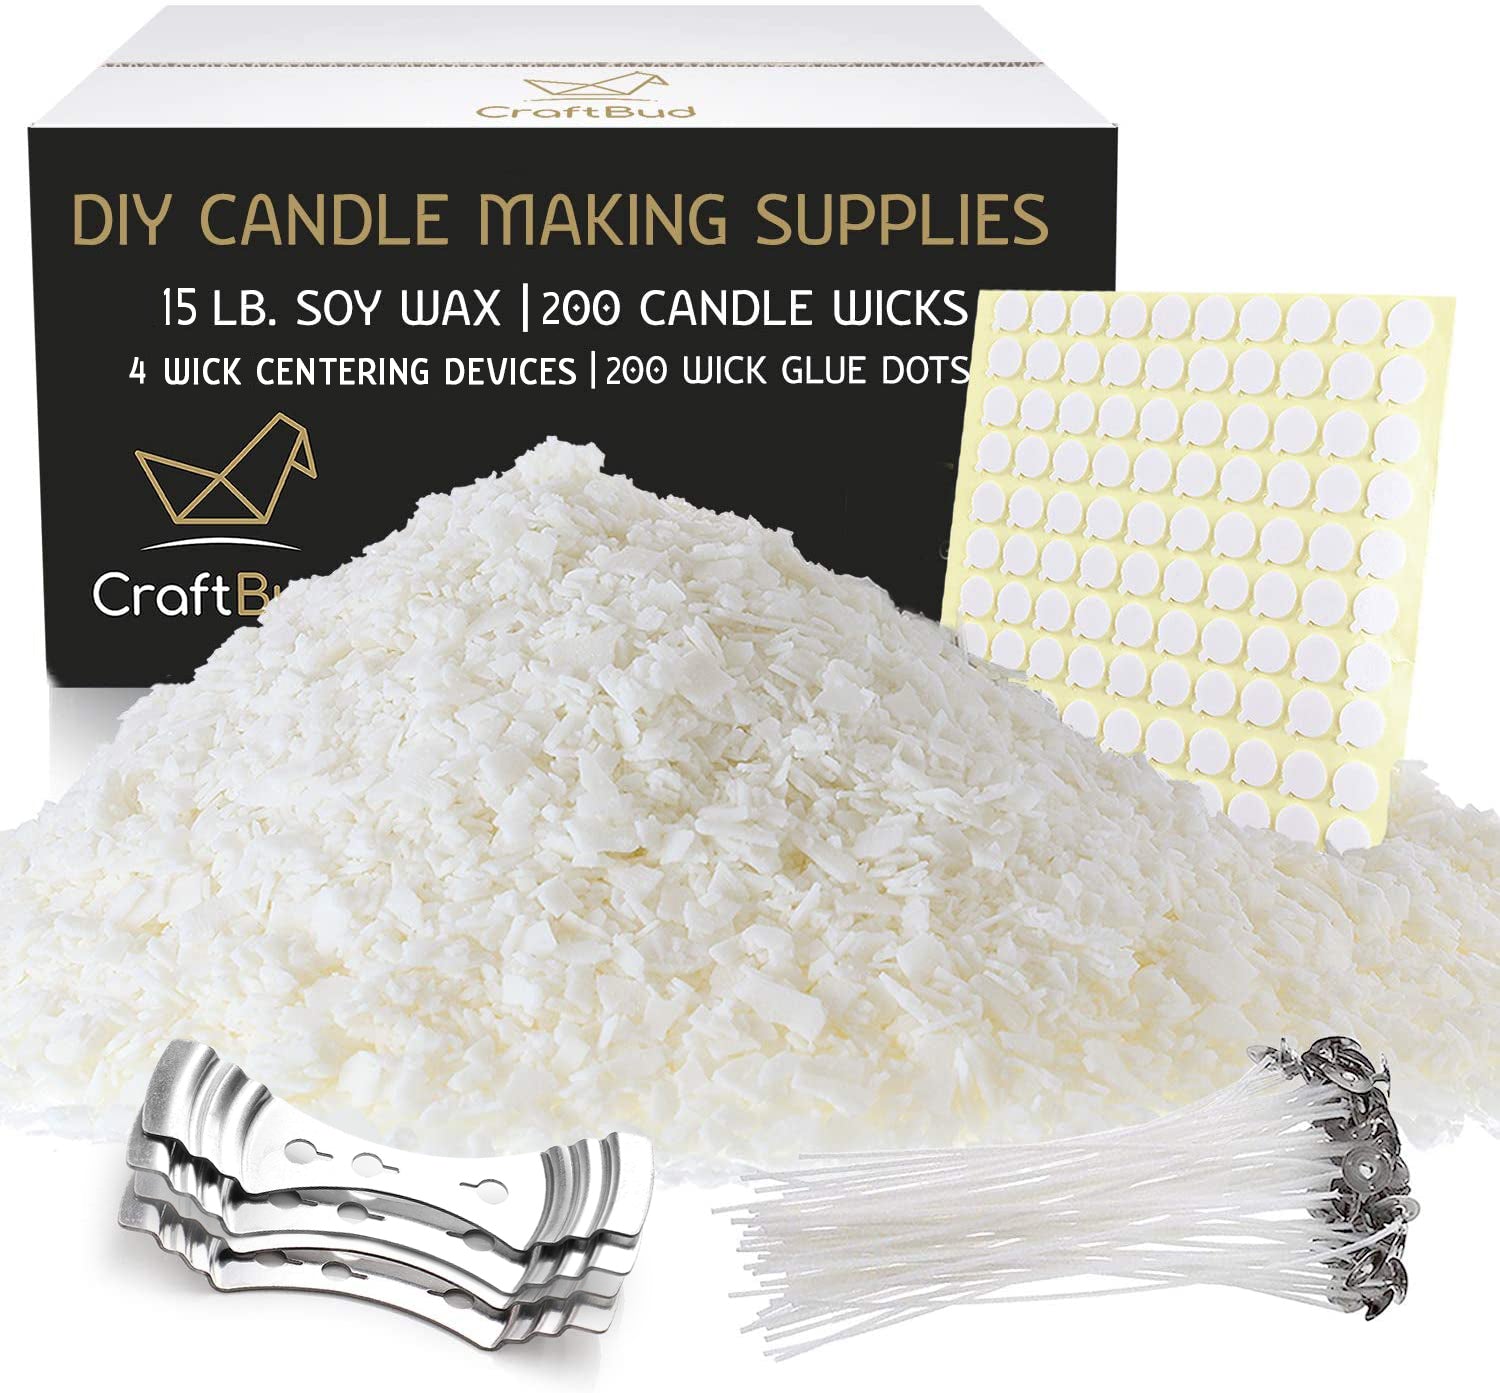 Candle Making Kit - Soy Candle Making Kits for Adults Beginners - Candle Making Supplies - Candle Pouring Pot, Soy Wax, Candle Wicks, 6 Fragrance